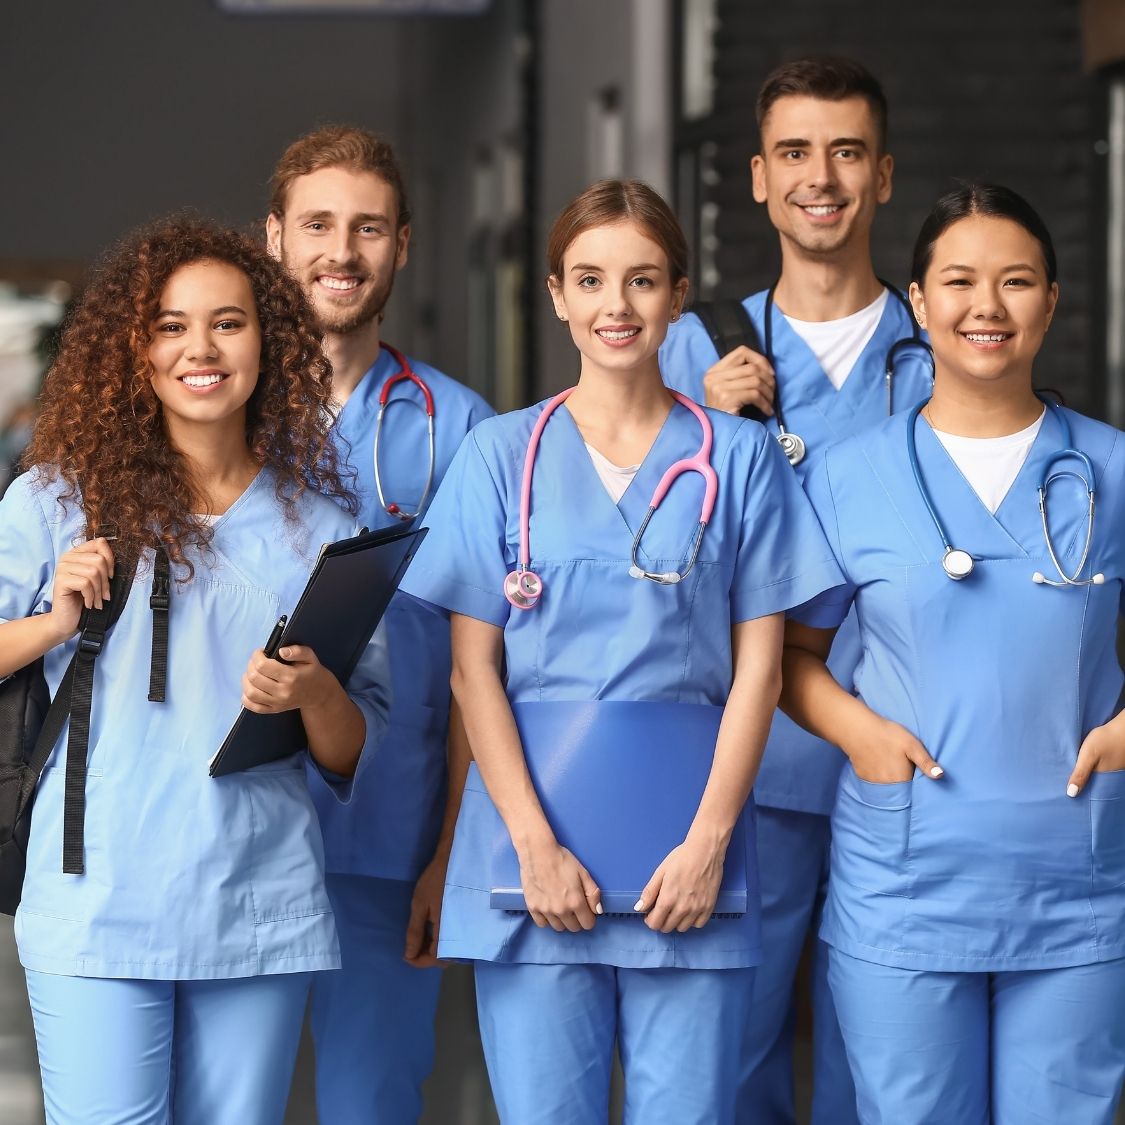 The Best Tips for First-Year Medical Residents